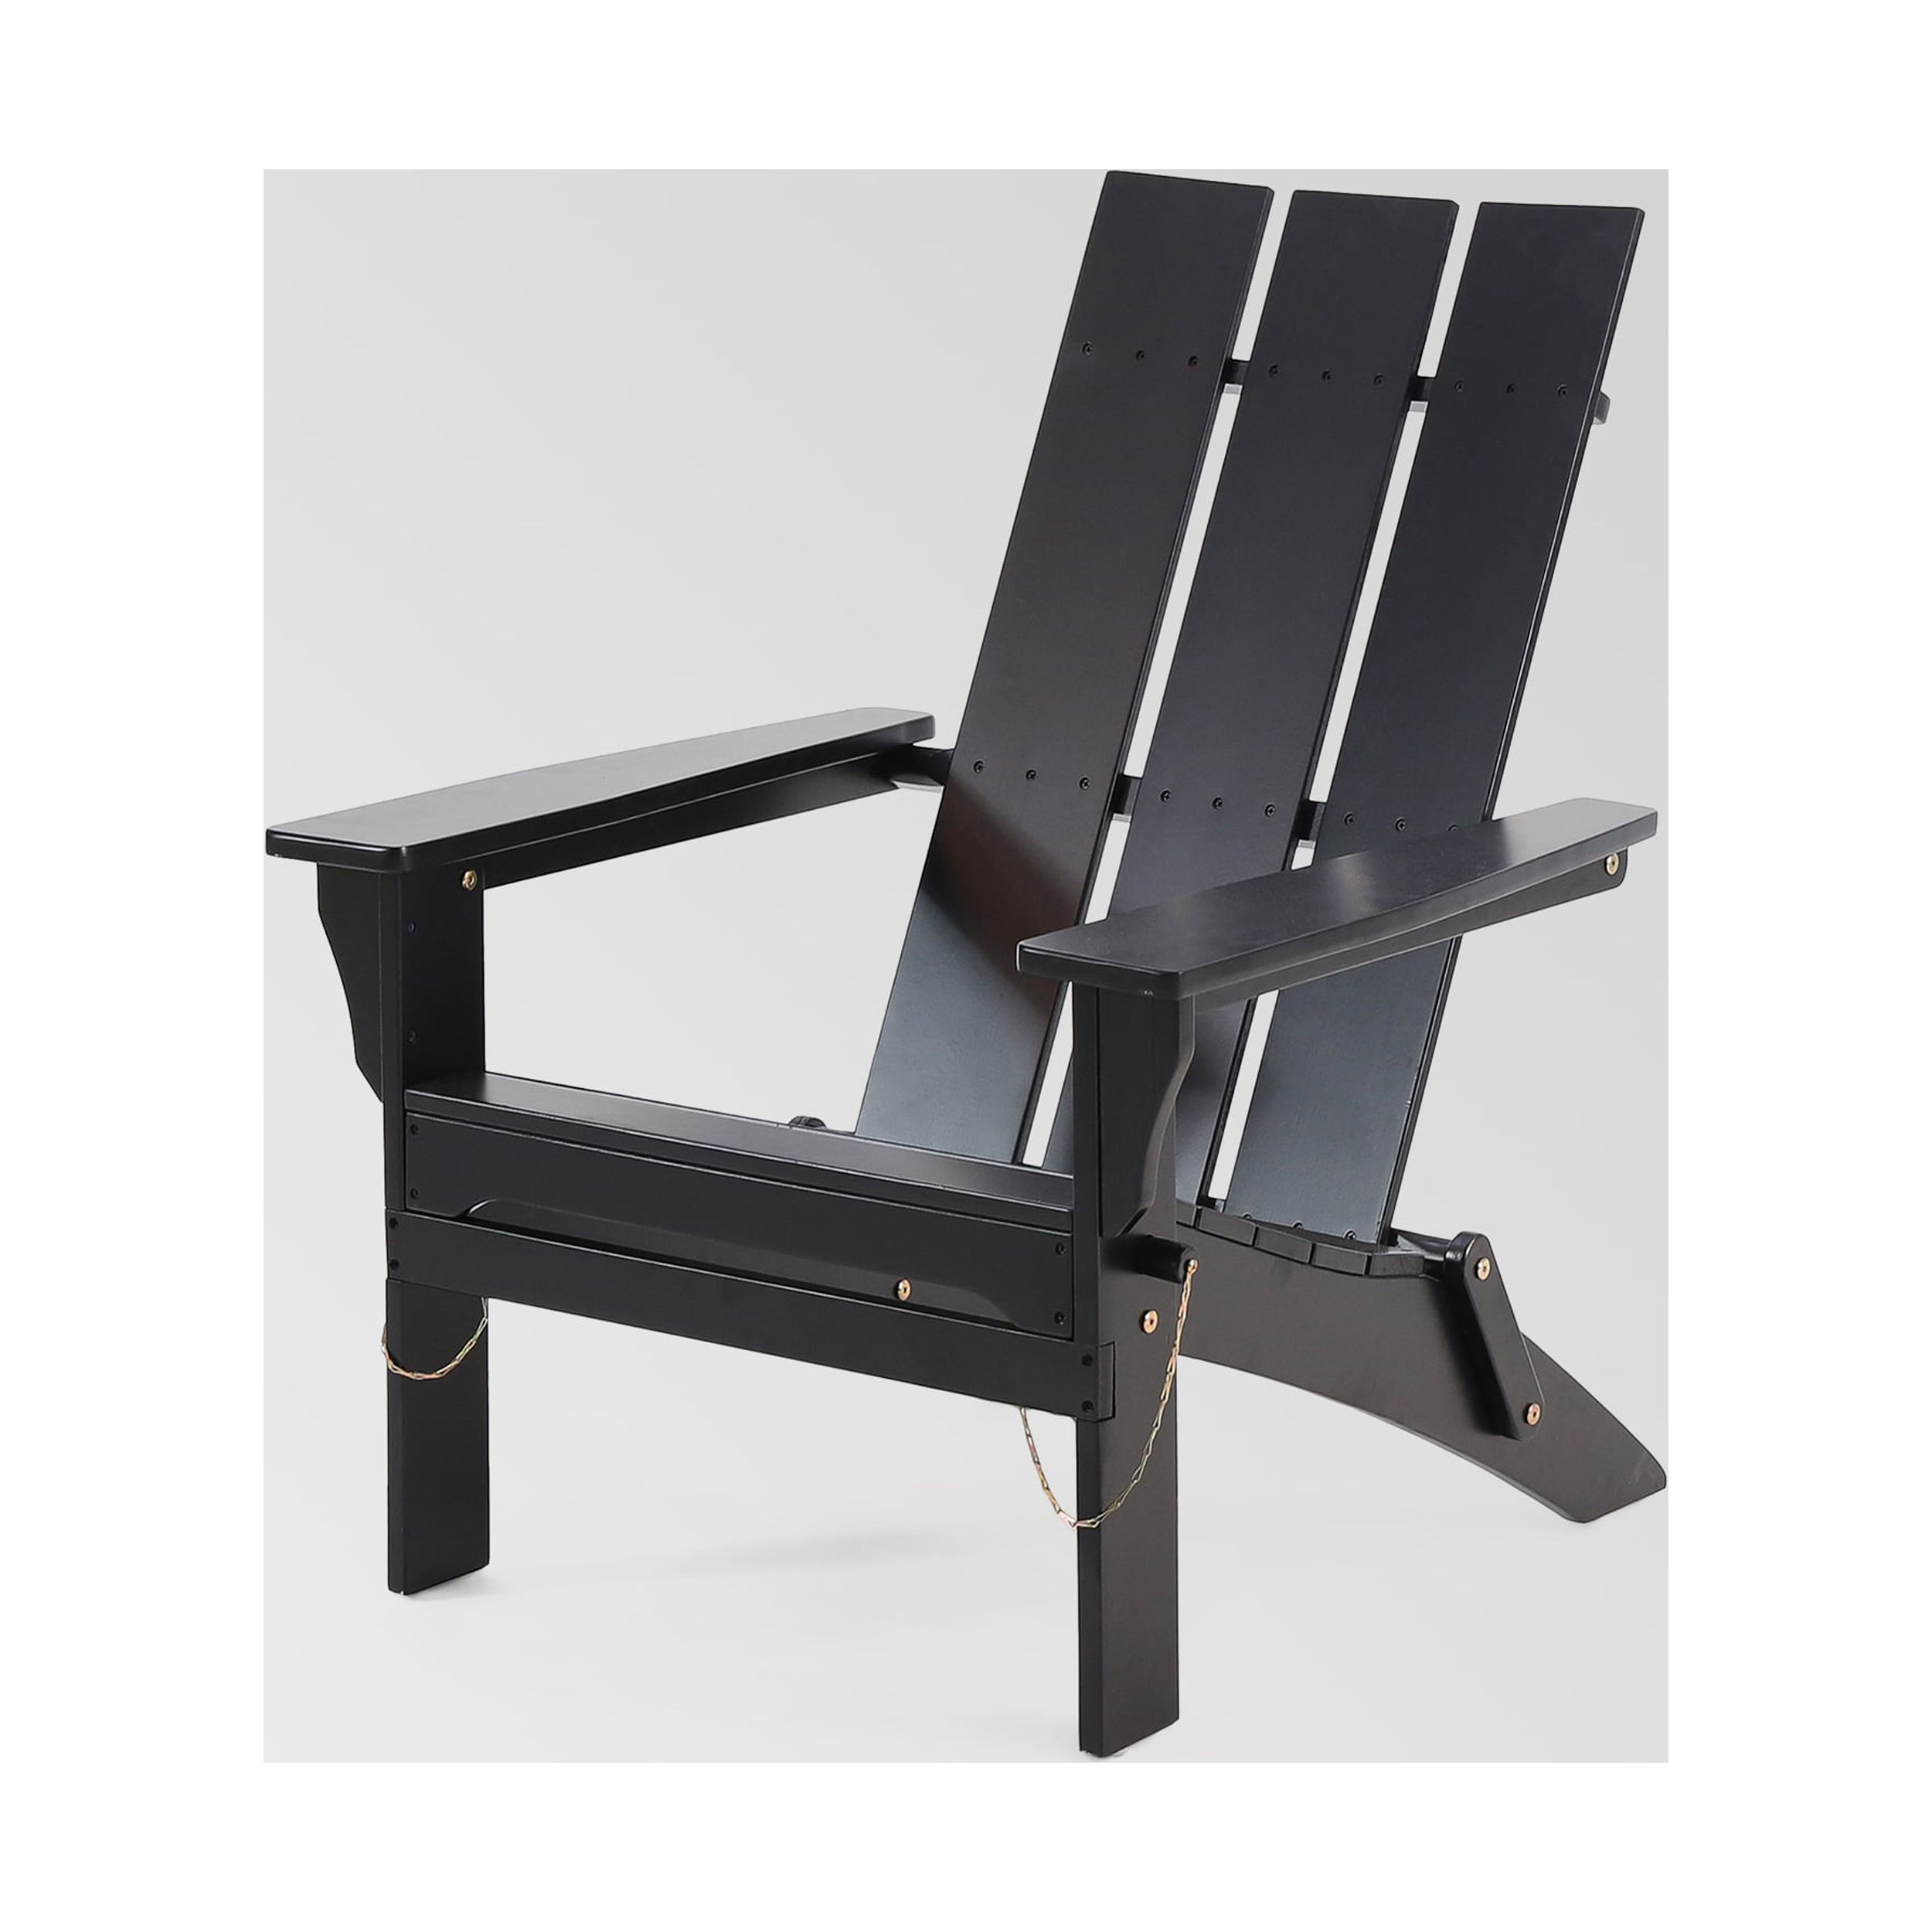 KUIKUI Outdoor Classic Pure Black Solid Wood Adirondack Chair Garden Lounge Chair Foldable - image 4 of 7